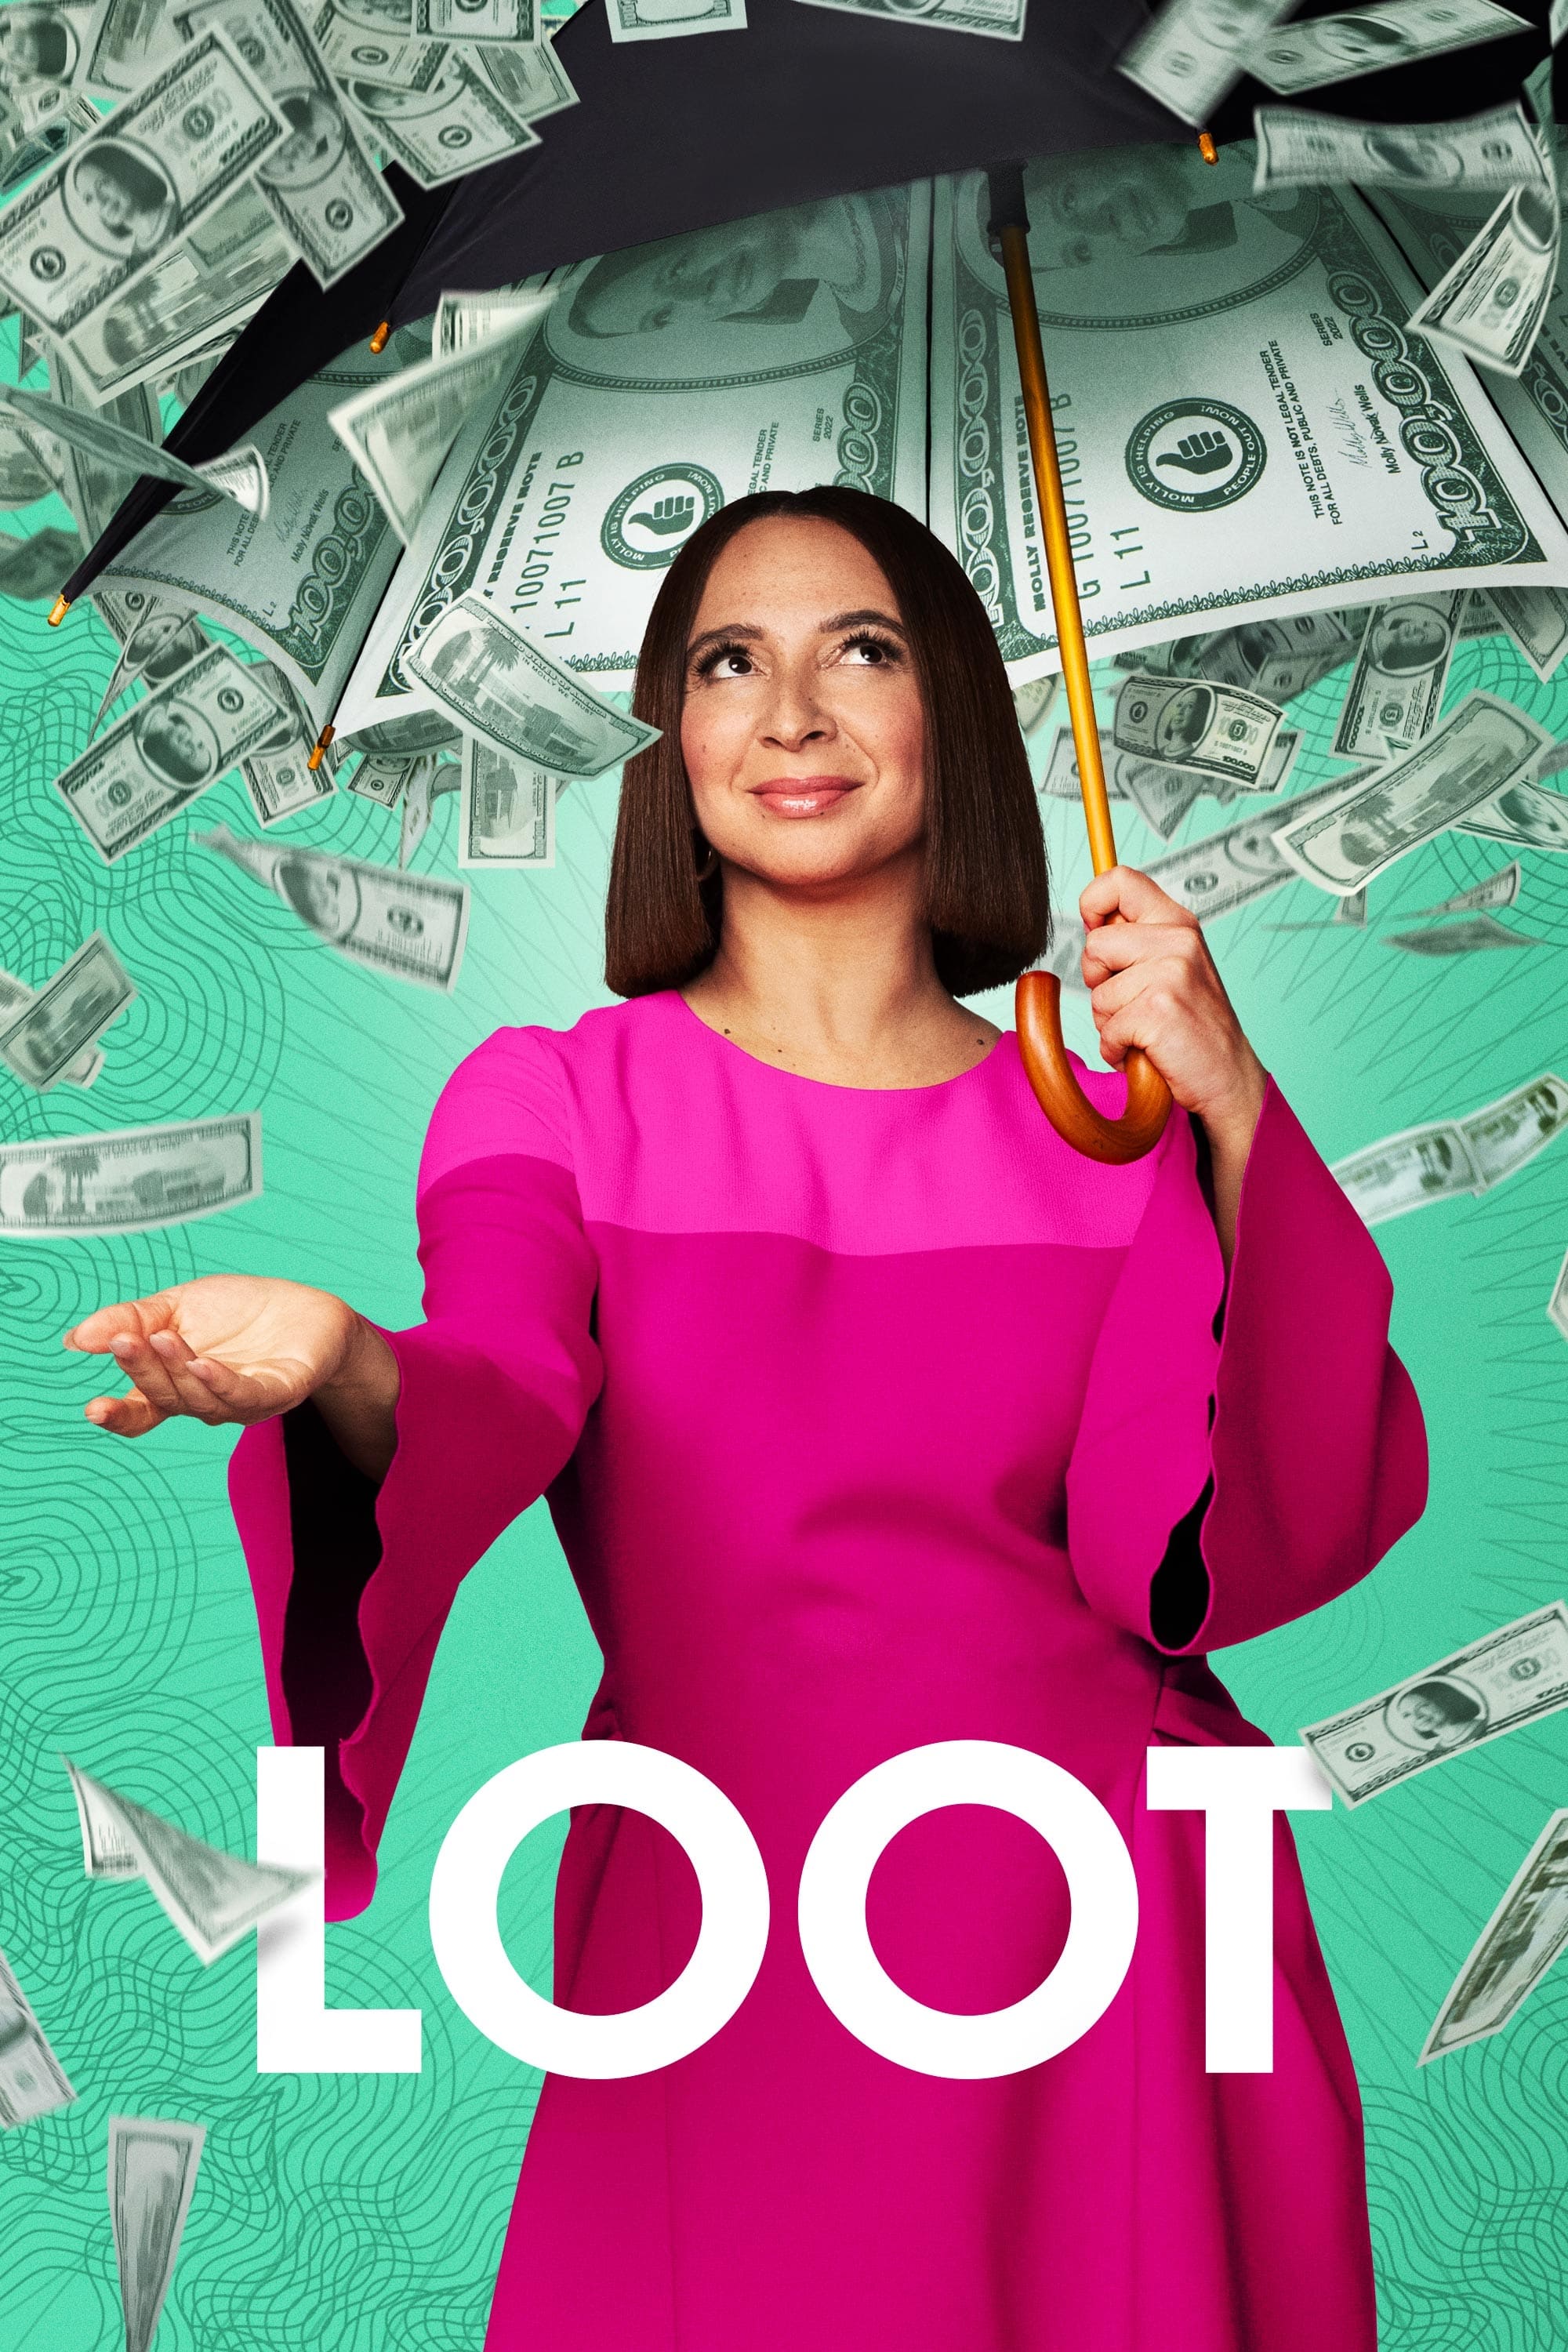 Loot TV Shows About Work